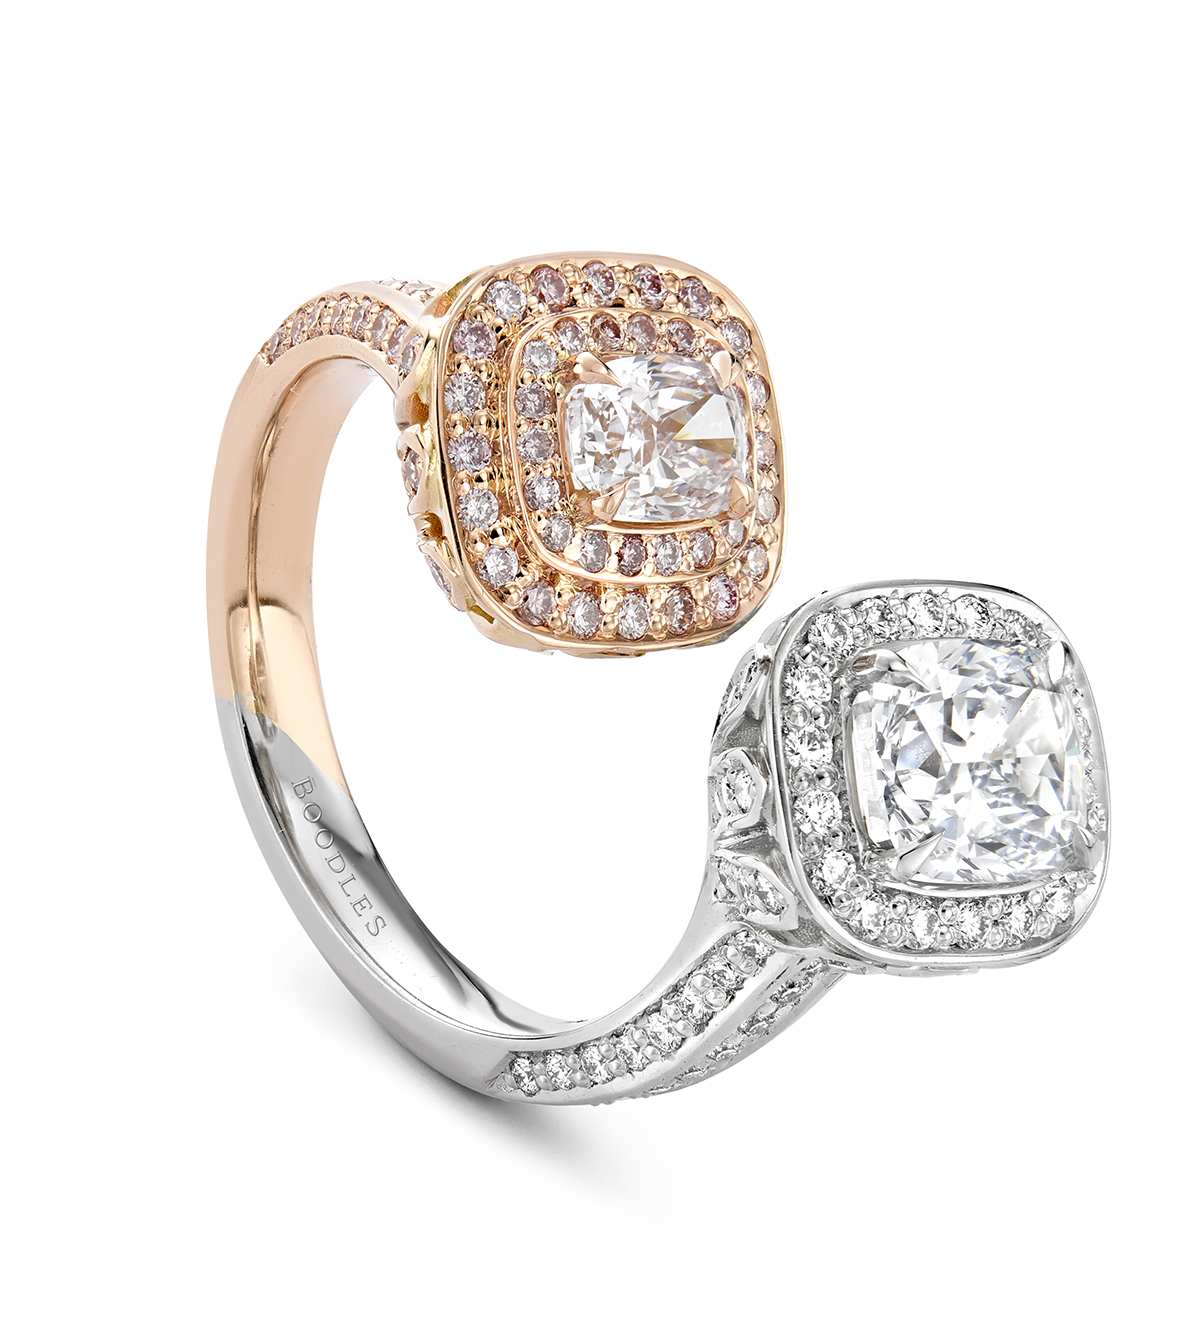 A rose gold and diamond ring